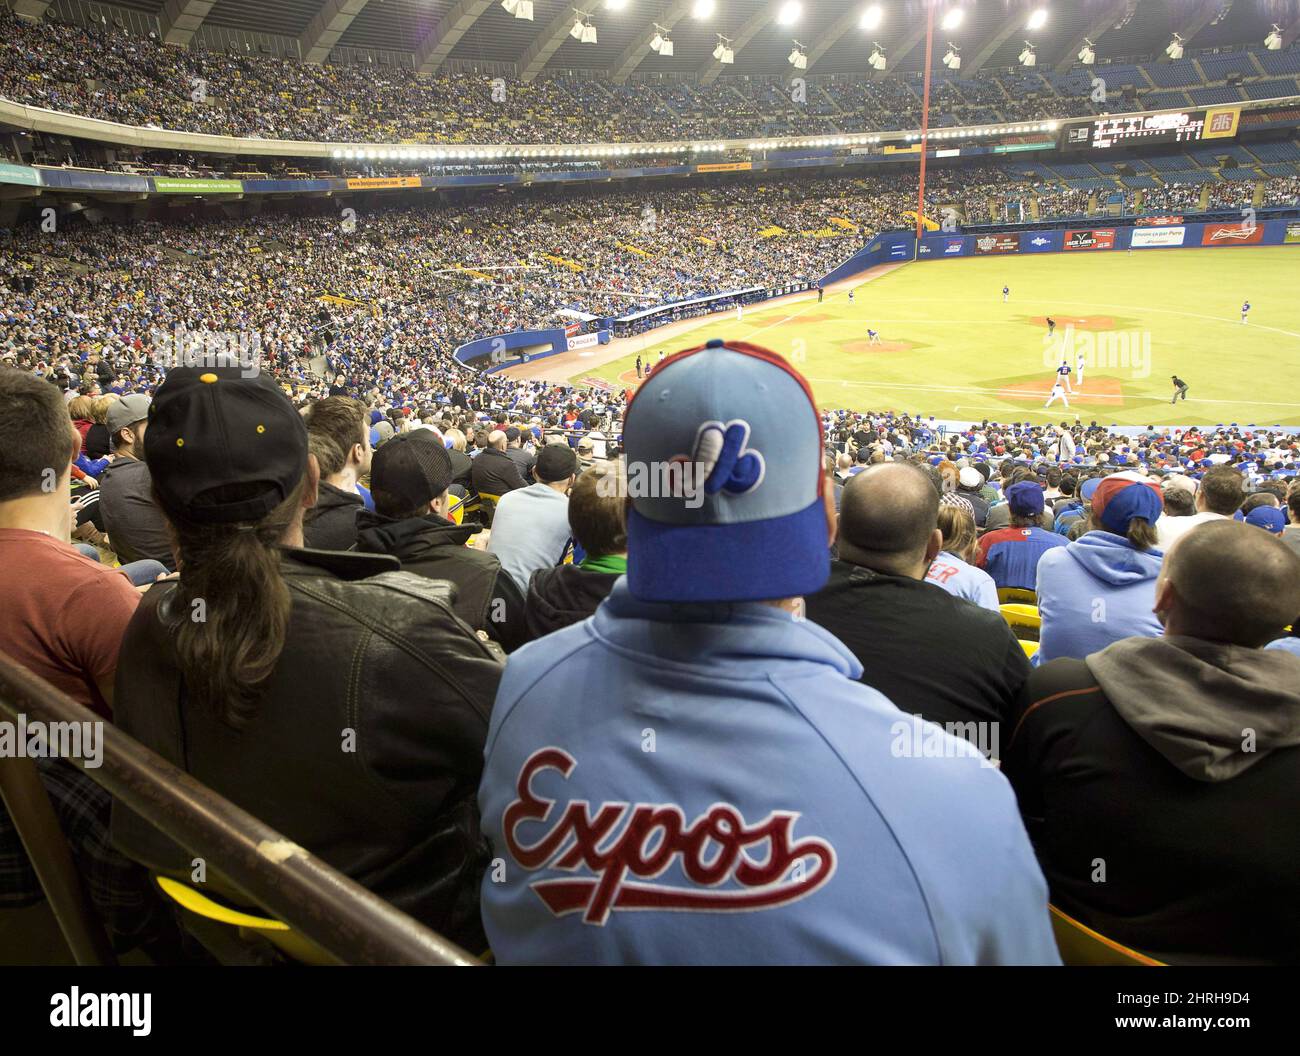 Fans wear Montreal Expos uniforms as they watch the Toronto Blue Jays in a  pre-season baseball game against the New York Mets Friday, March 28, 2014  in Montreal. A study commissioned by